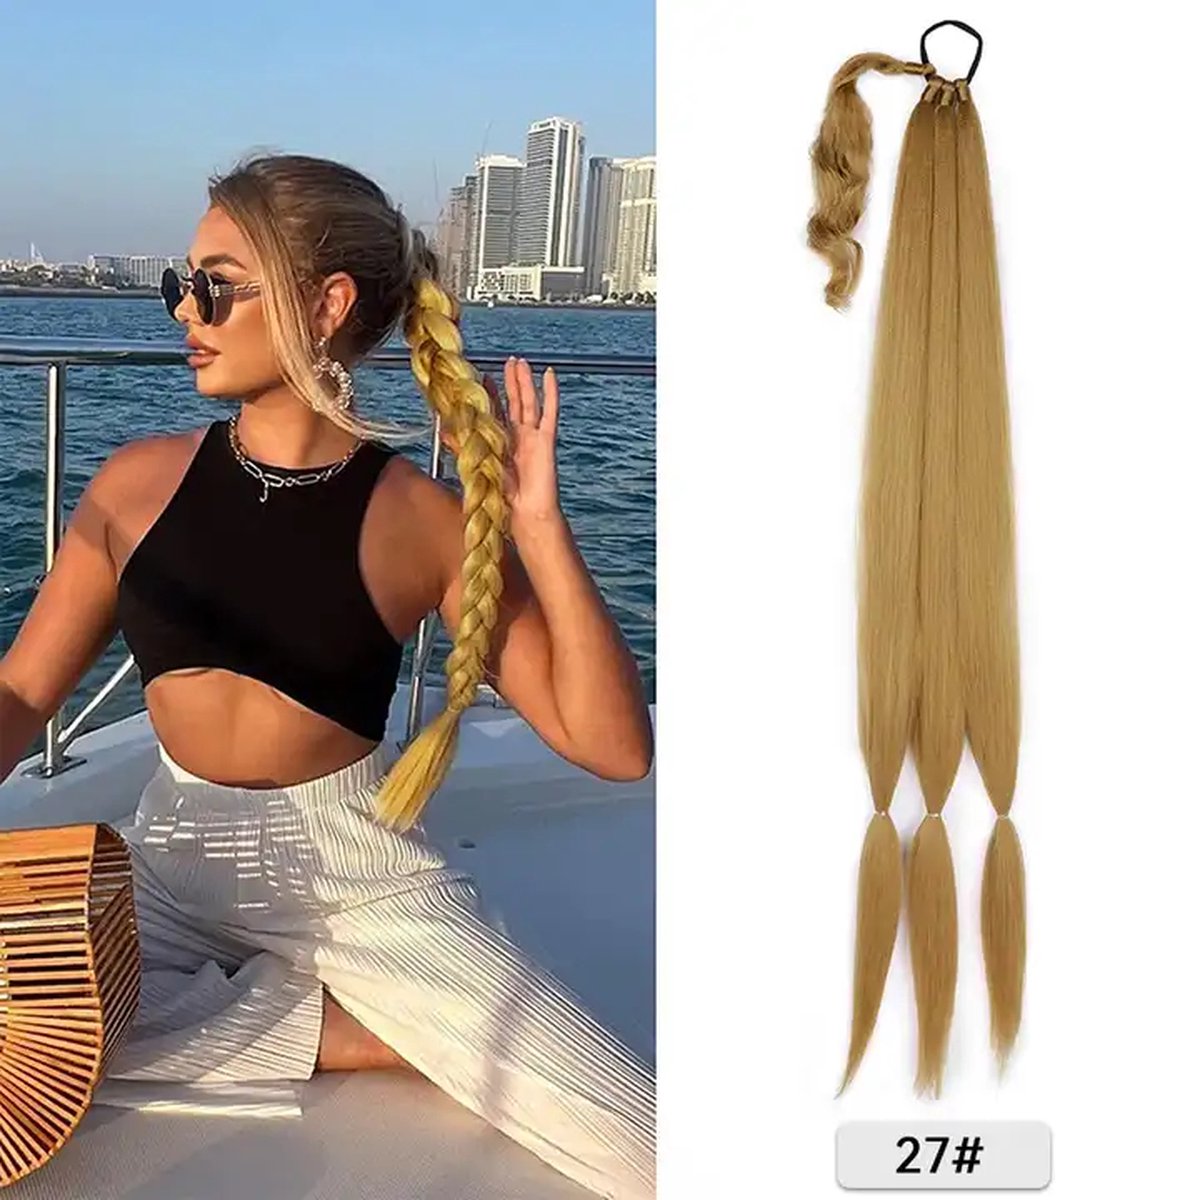 Ponytail Hair Extensions - Braided Ponytail Synthetic - Long Natural looking Braid - #27 Blond Hair Braid